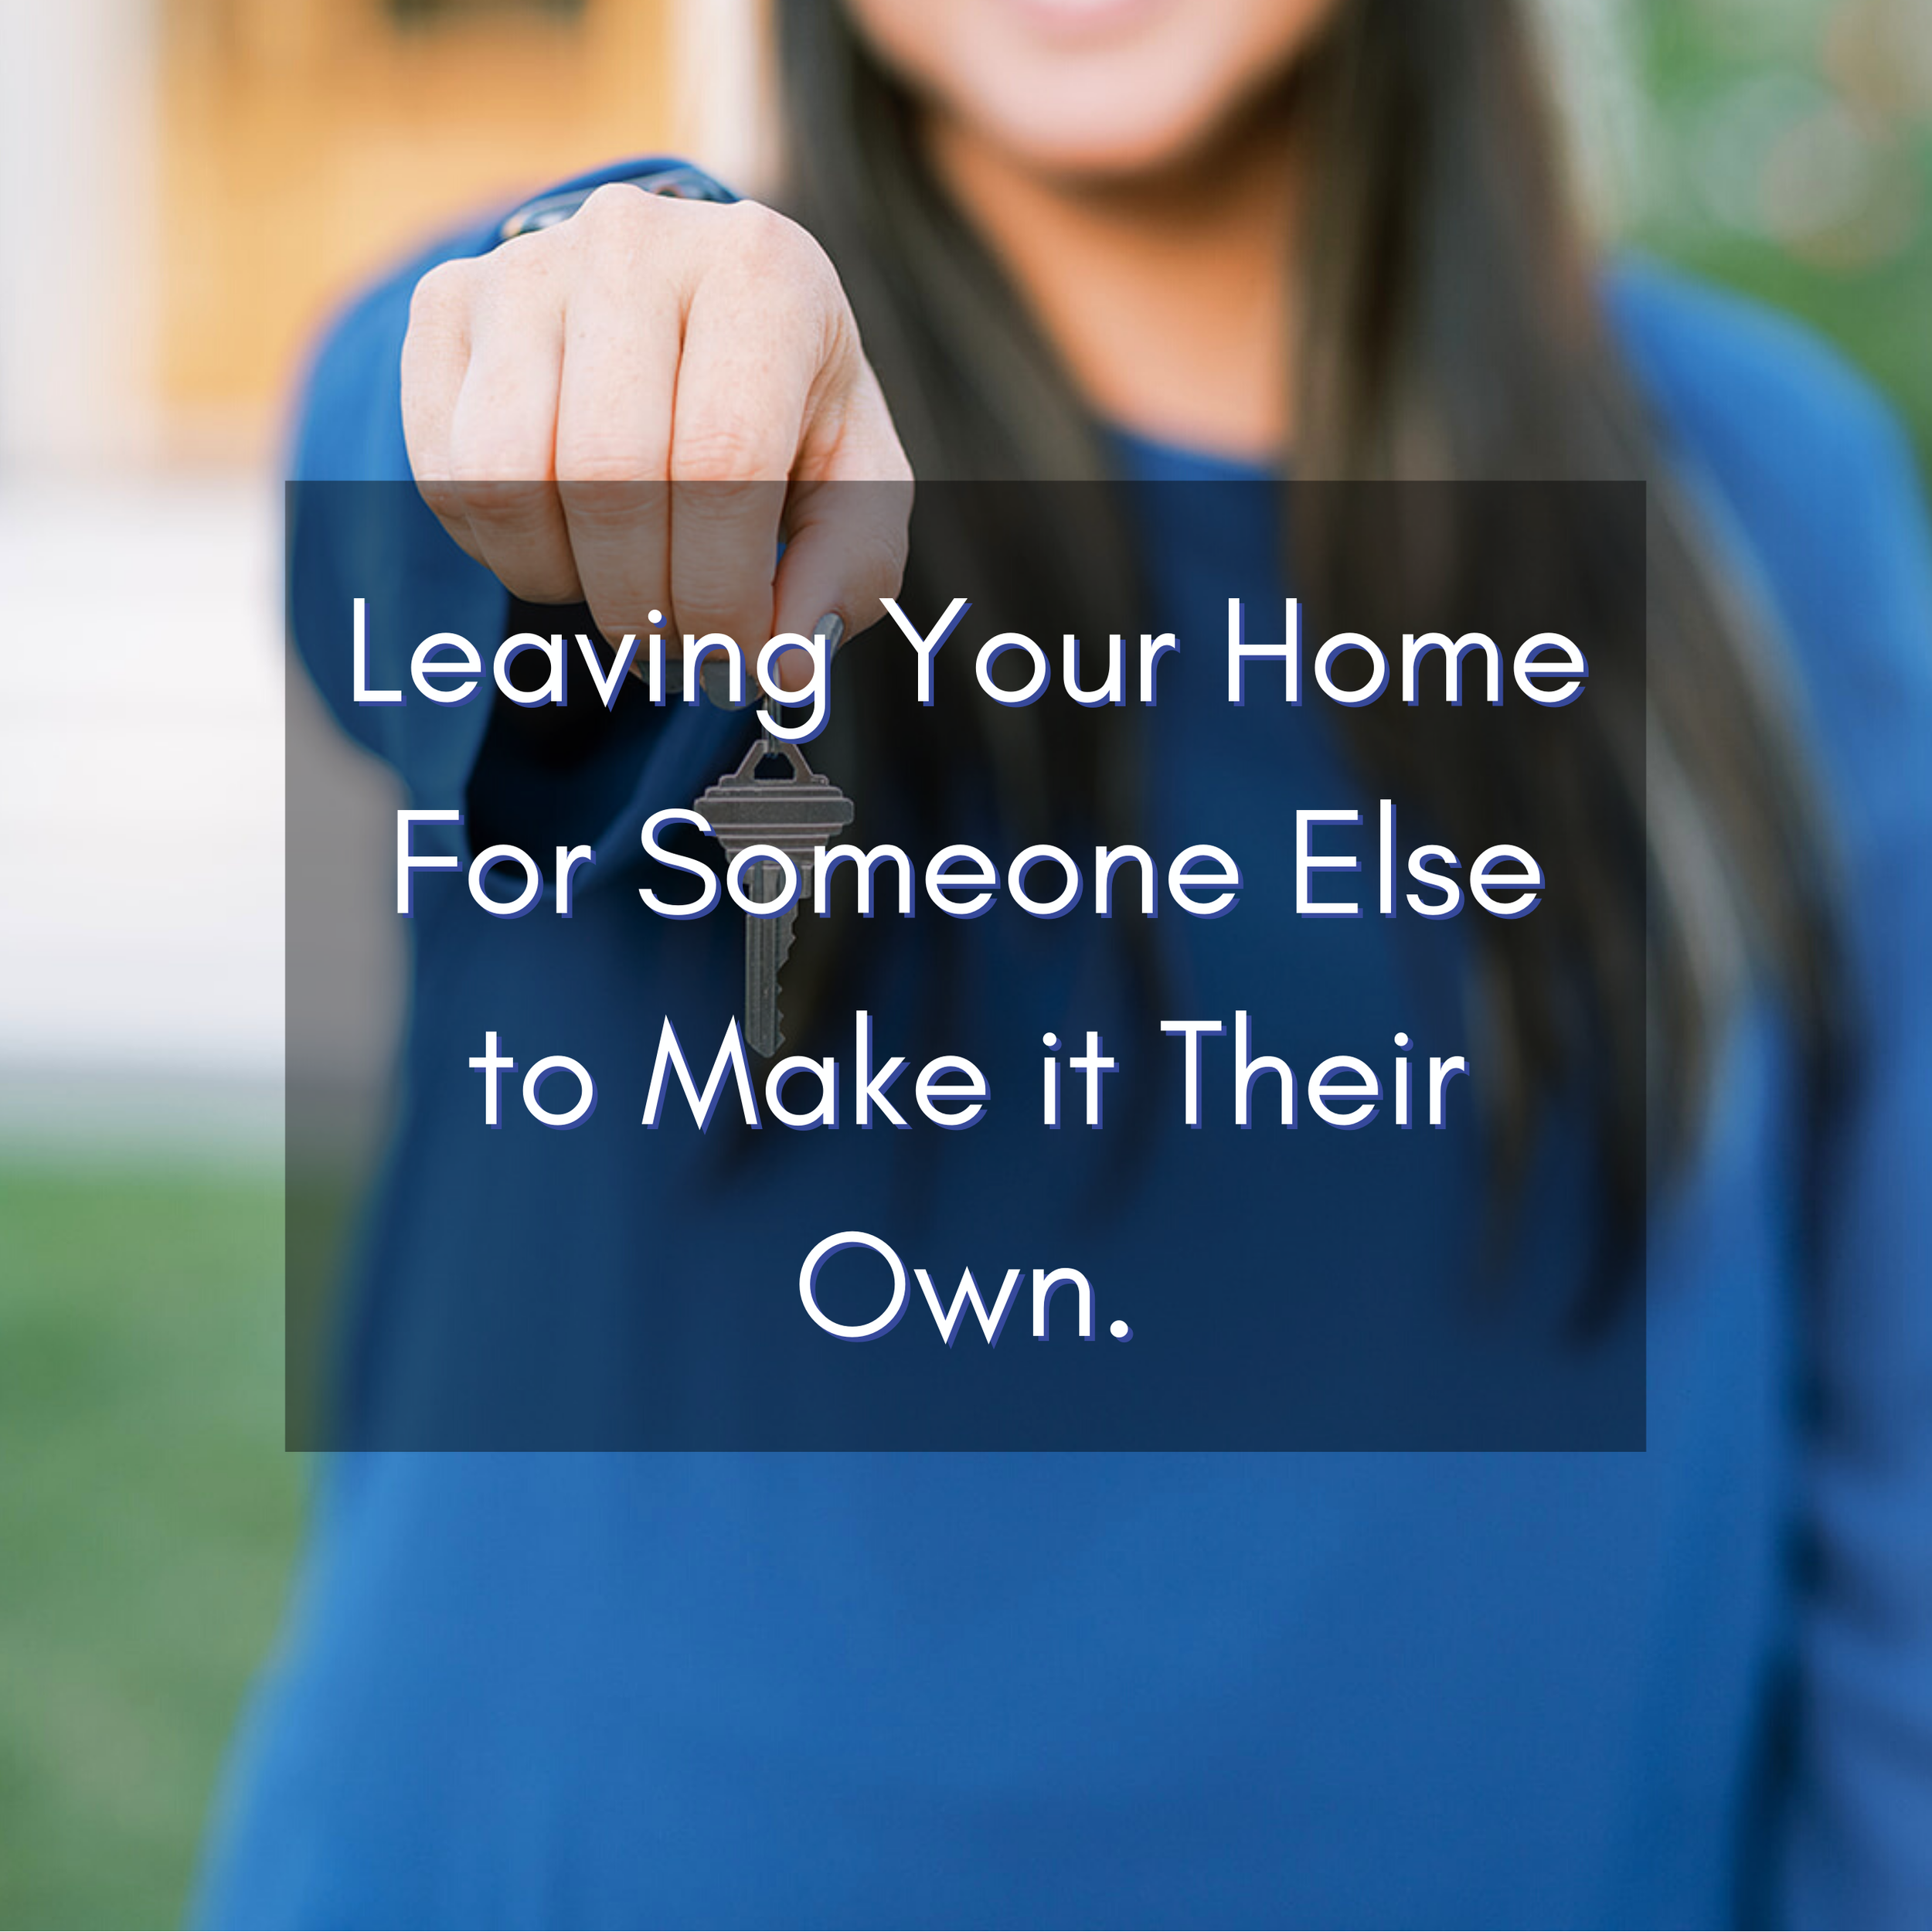 Leaving Your Home for someone else to make it their own.